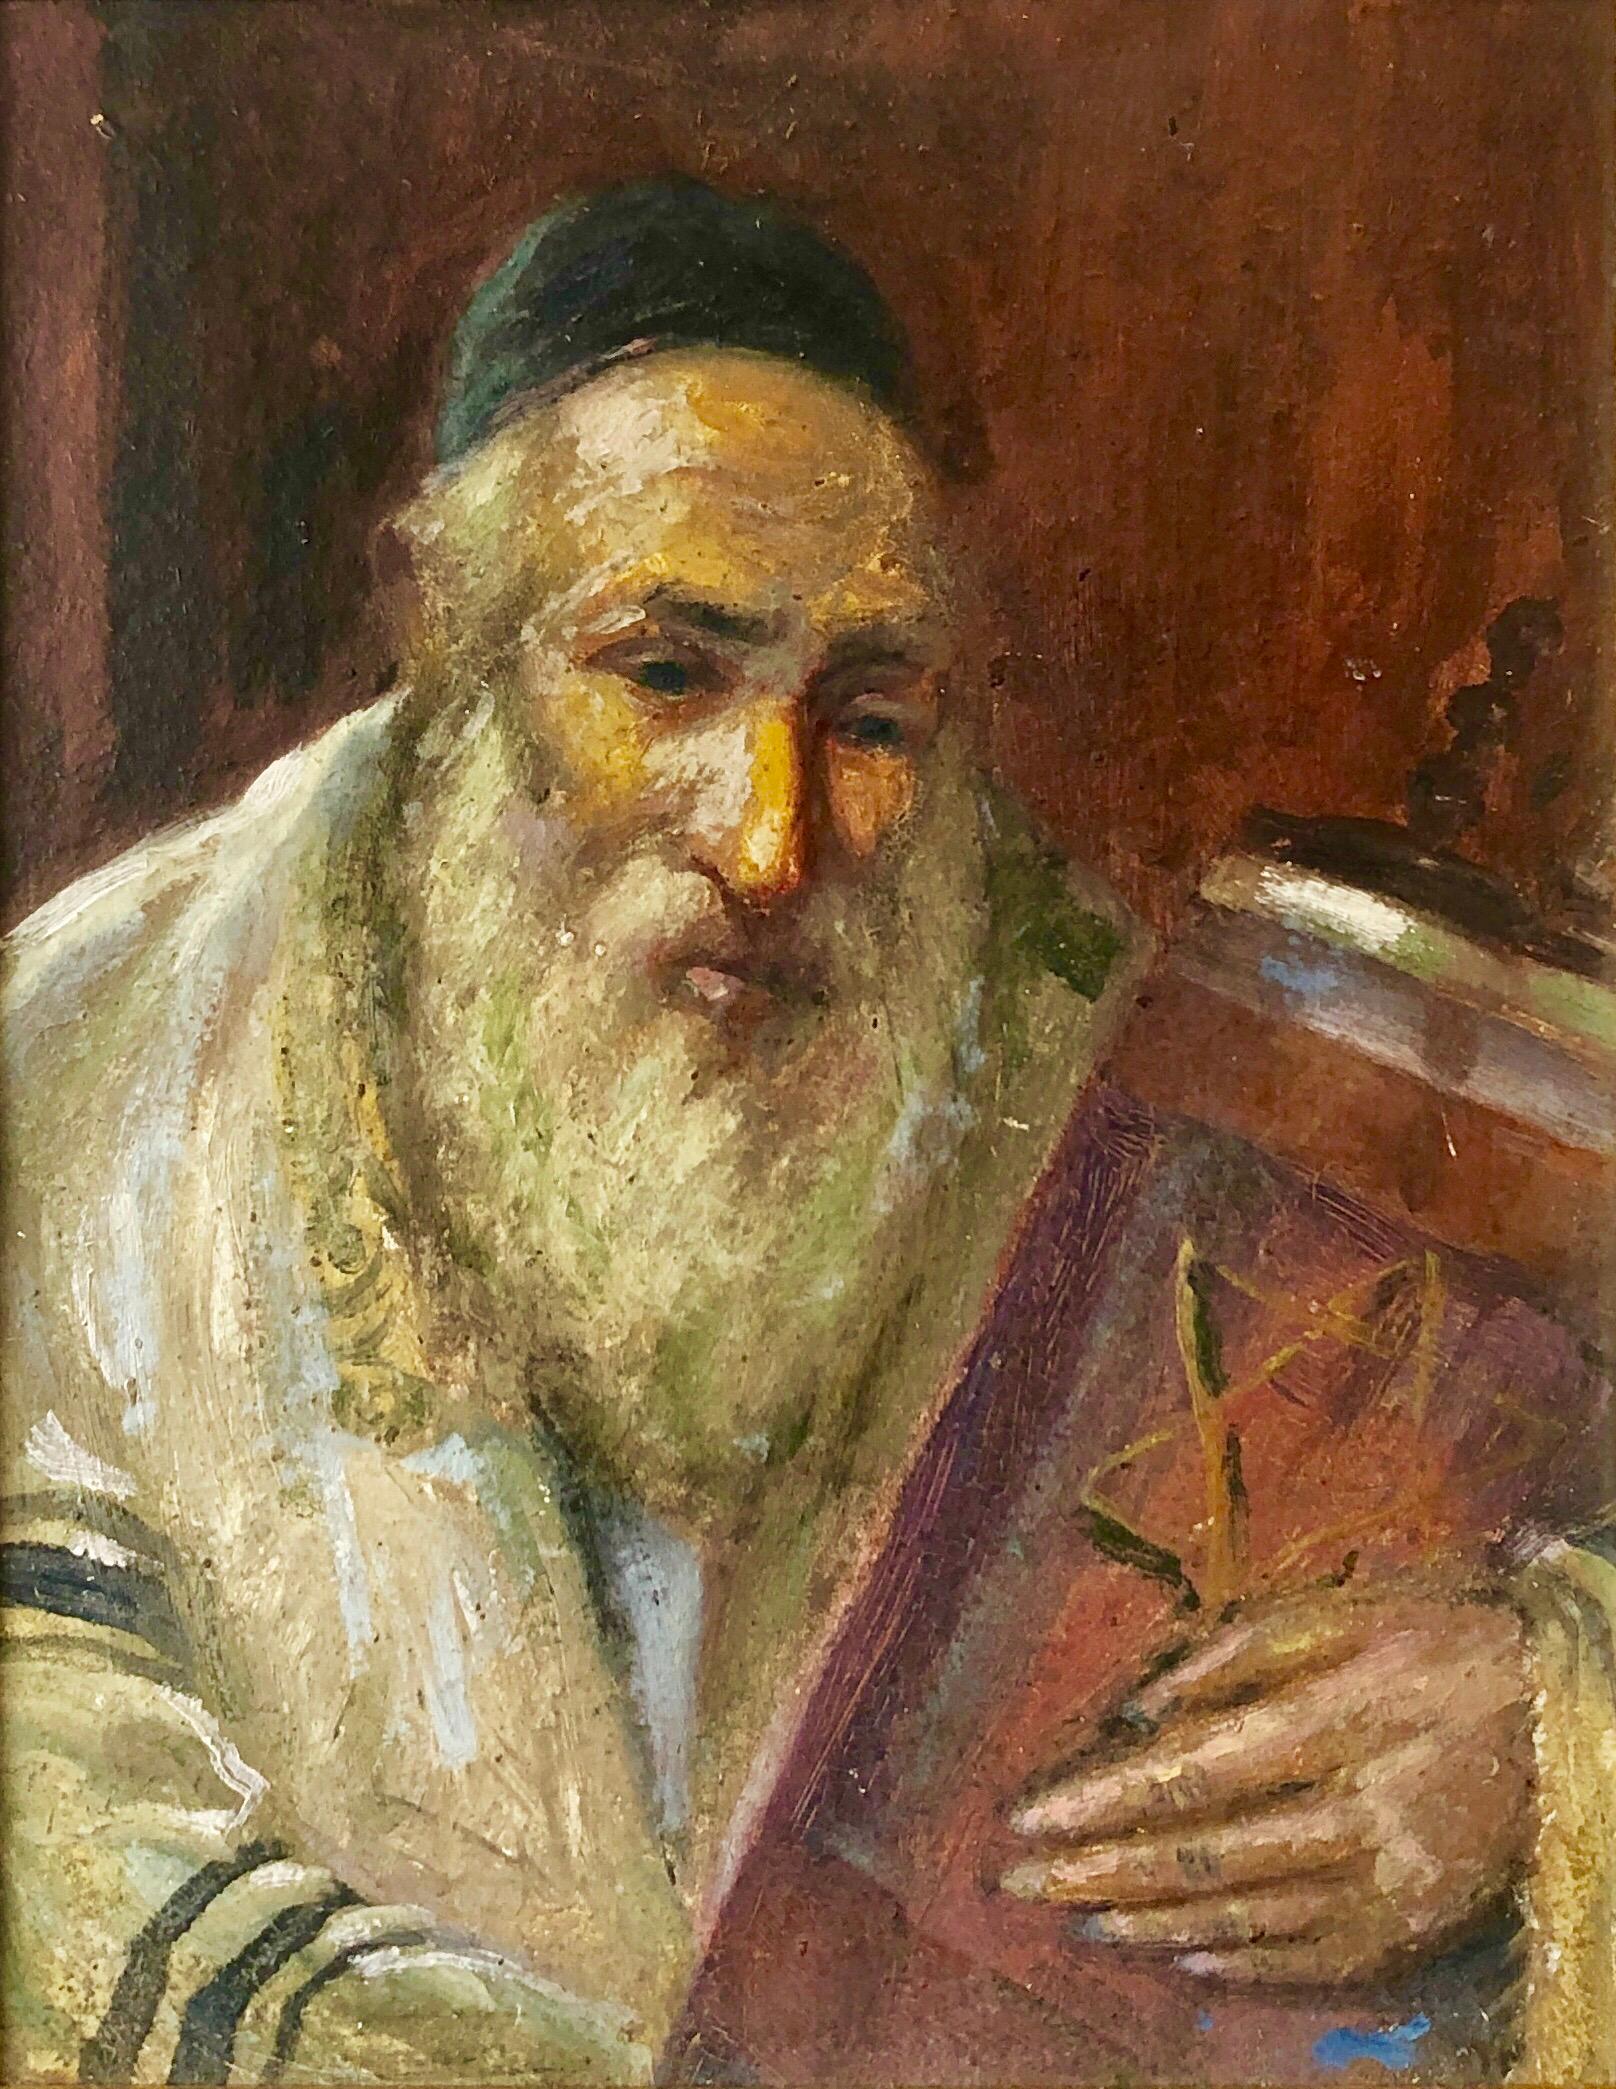 Judaic oil painting by Krakow, Poland born artist Mark Siegband.
Signed and framed, An elderly Hasidic rabbi holding a Torah.
He is one of many great Jewish Polish artists that included Leopold Gottlieb, Maurycy Gottlieb, Henryk Hechtkopf, Leopold